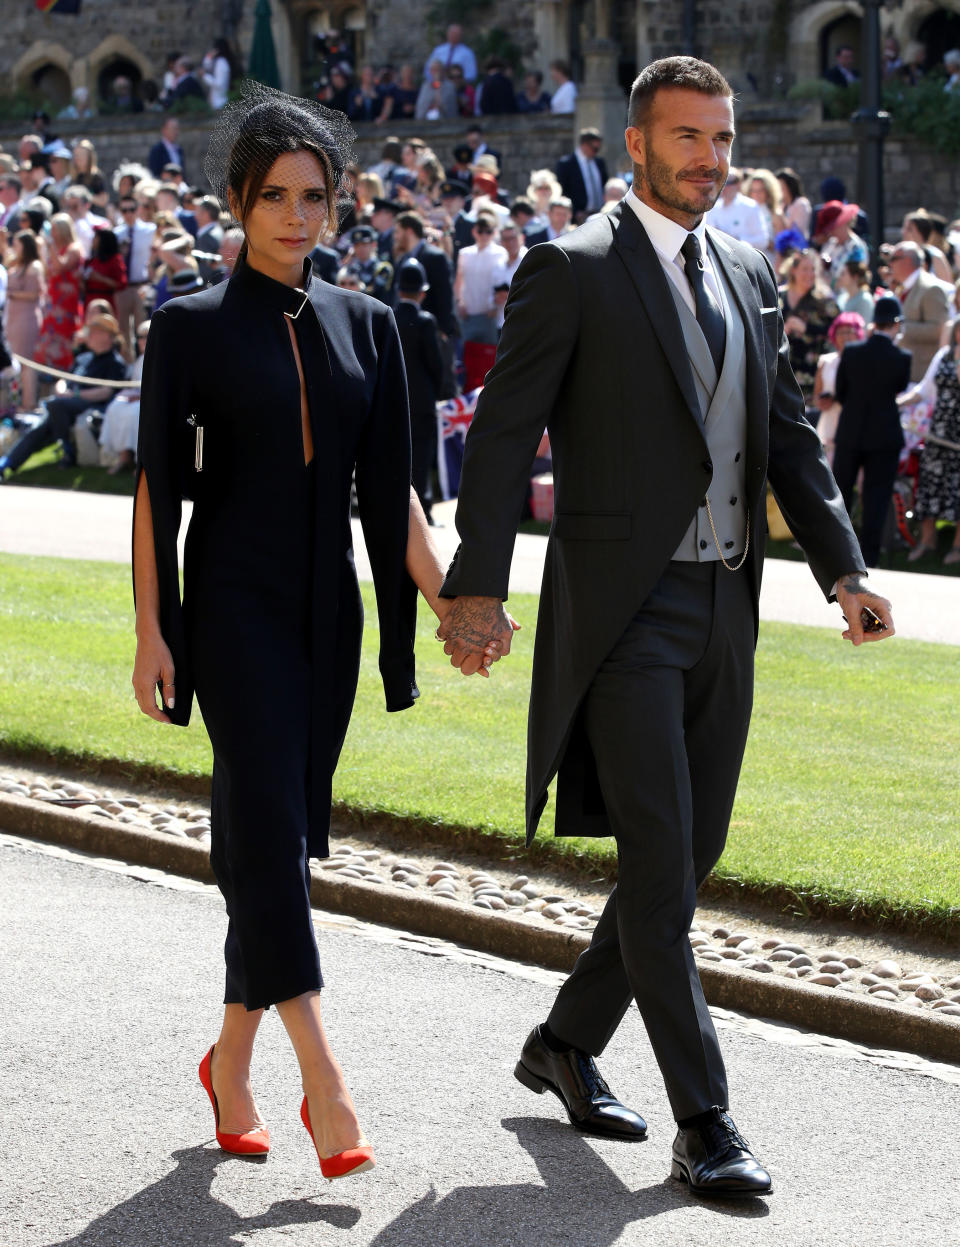 Victoria and David Beckham at St George's Chapel, Windsor Castle for Prince Harry and Meghan Markle's wedding in 2018. (Getty Images)